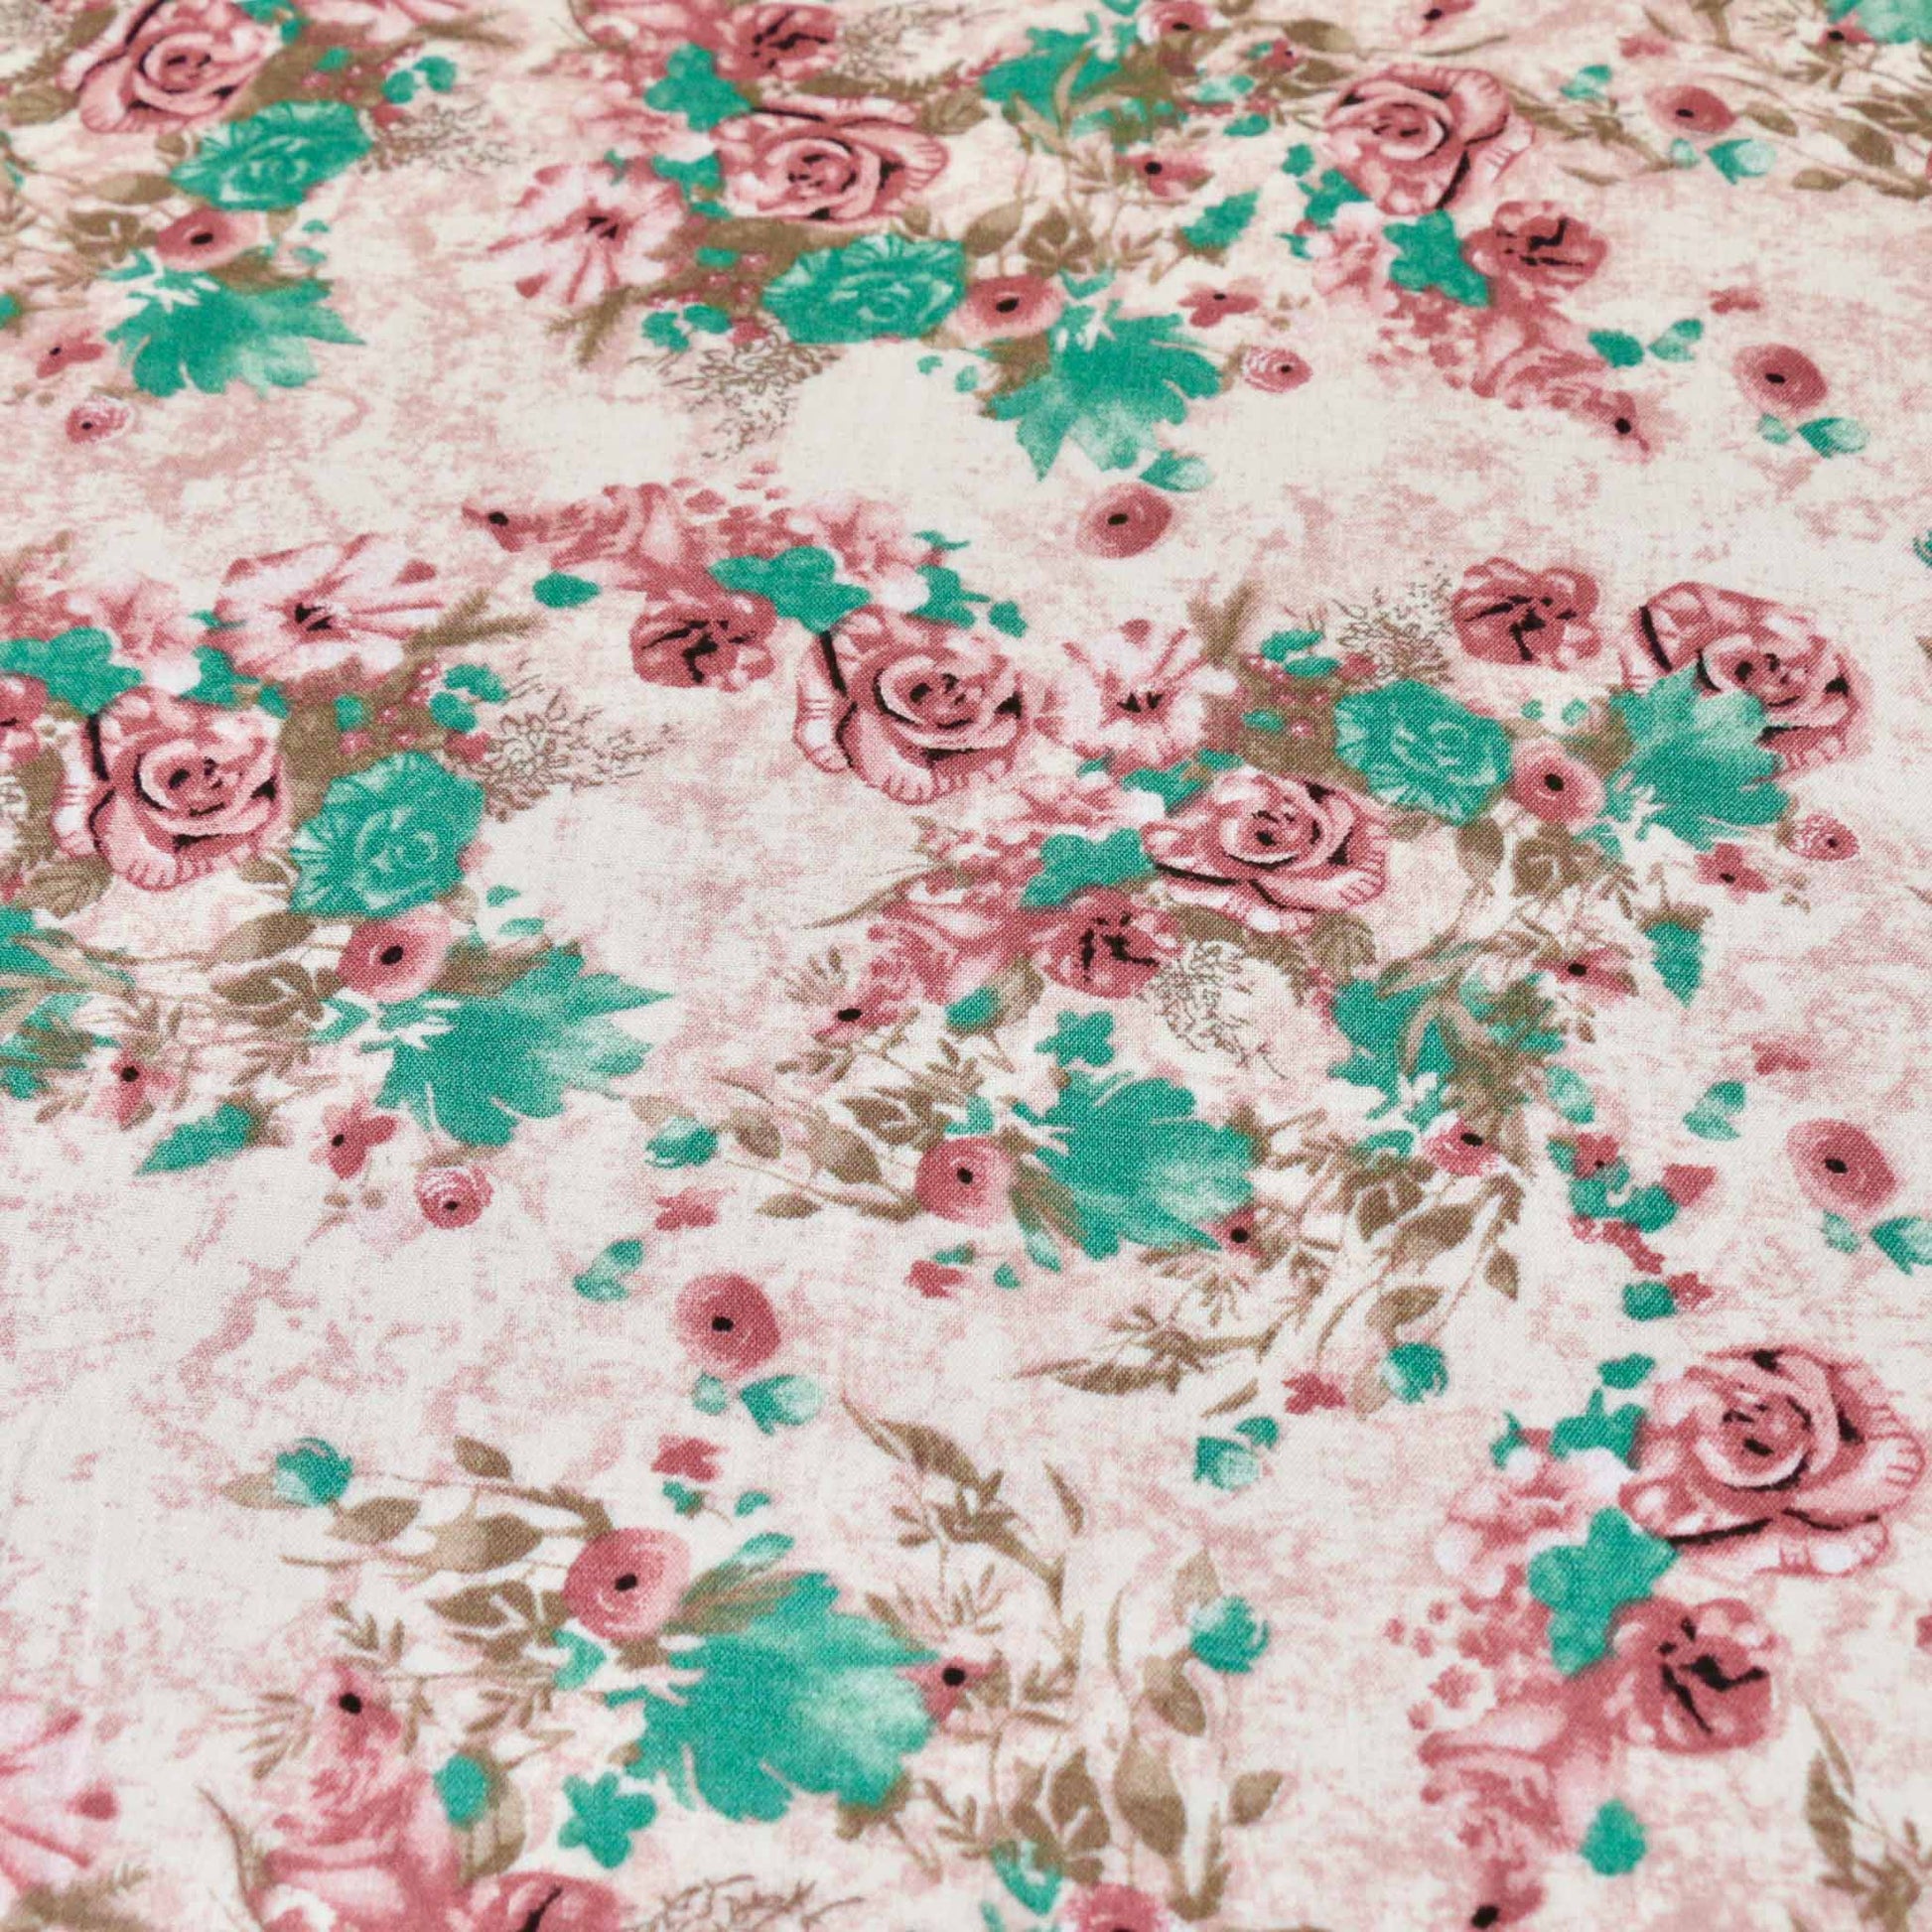 dusty pink and turquoise viscose challis dressmaking rayon fabric with classical floral print